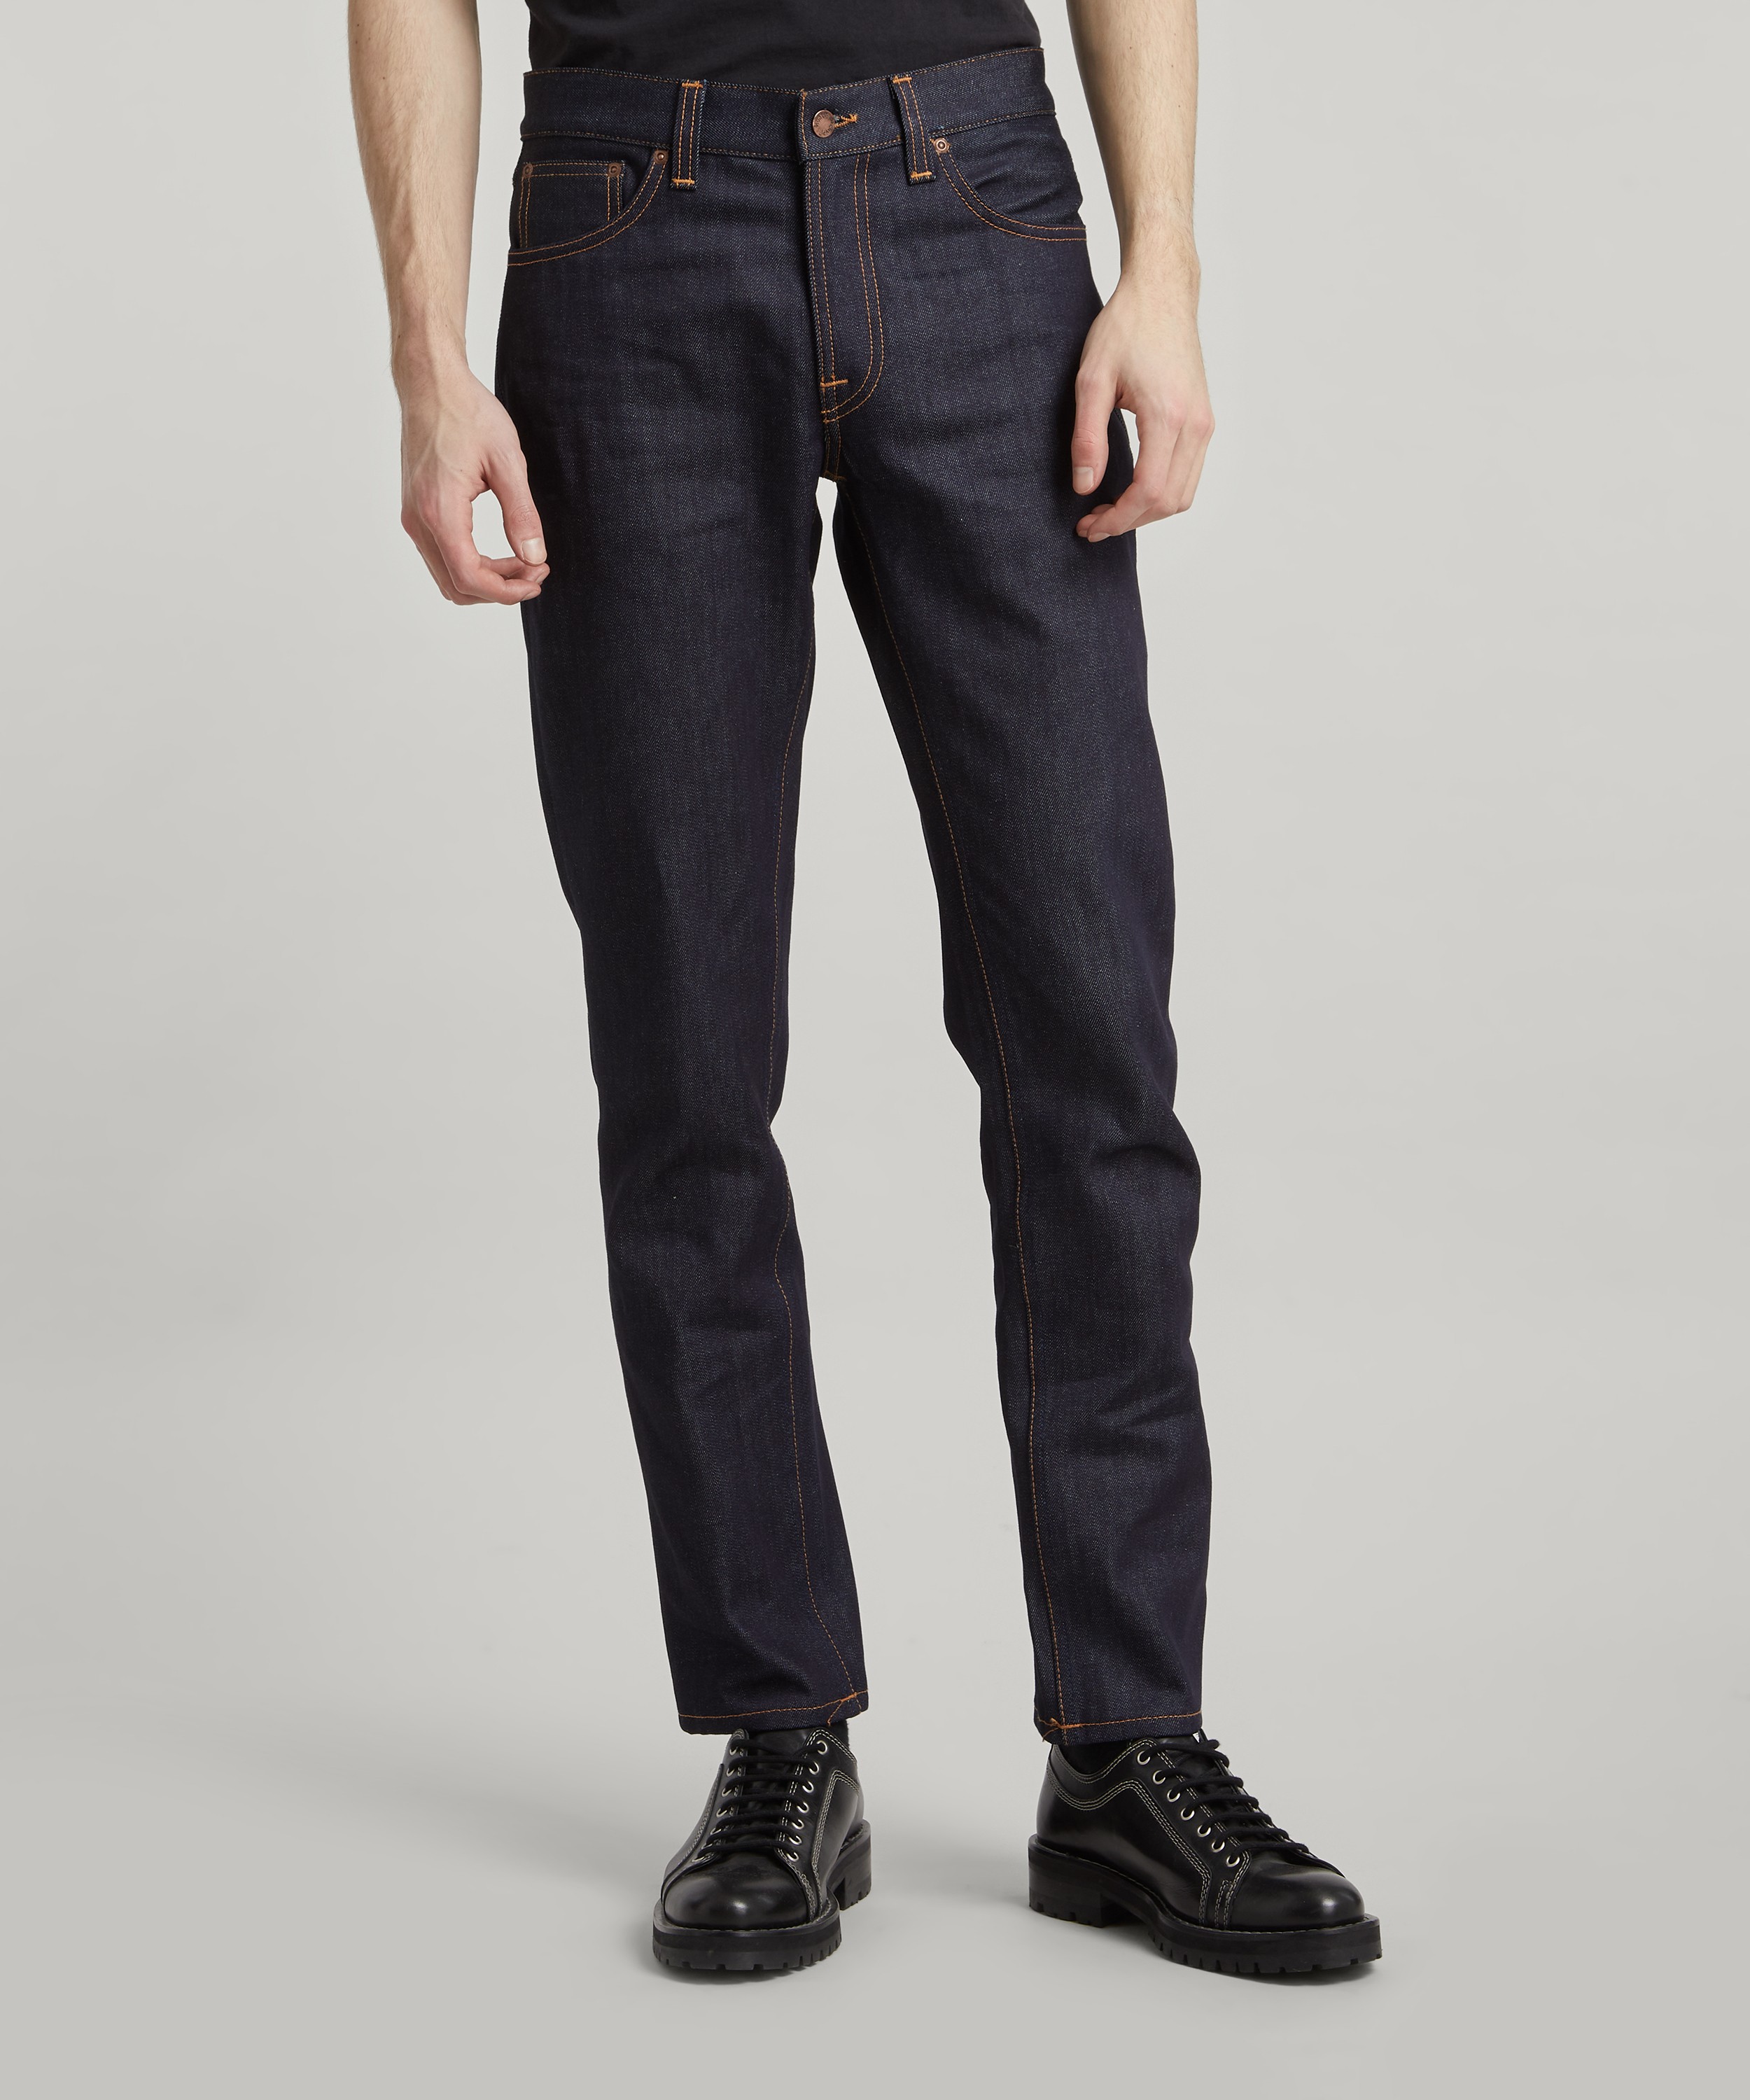 Nudie Jeans - Gritty Jackson Jeans image number 1